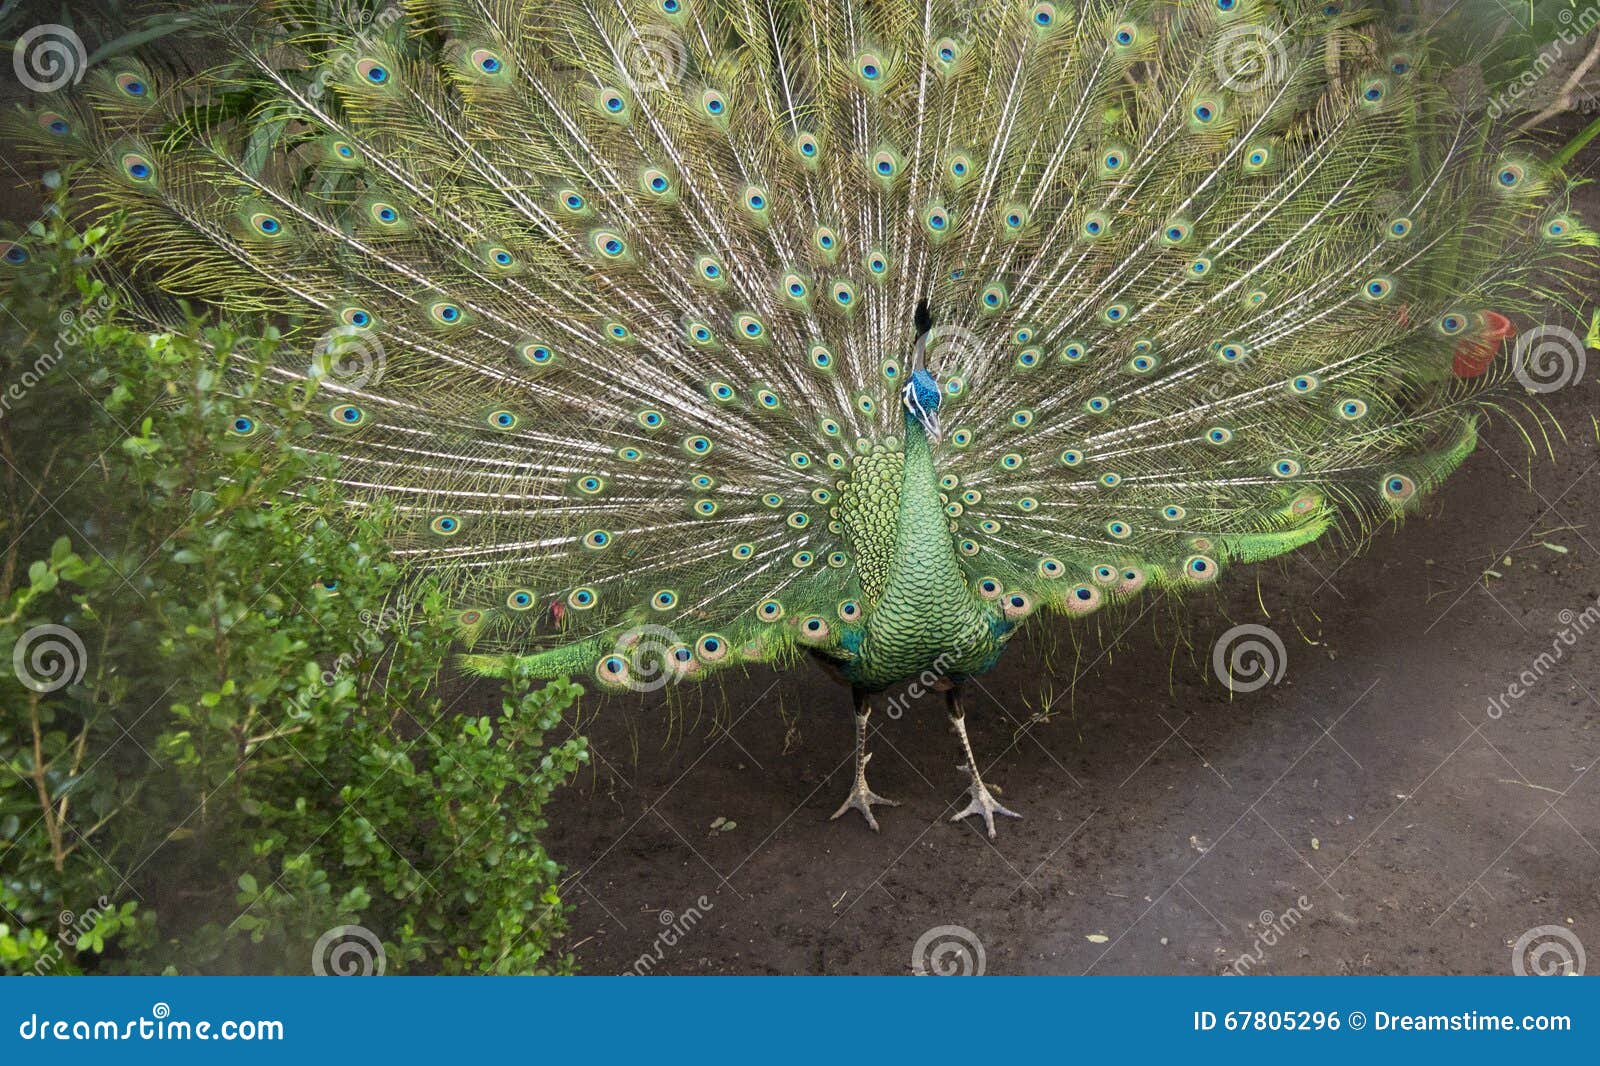 pavo real - peacock